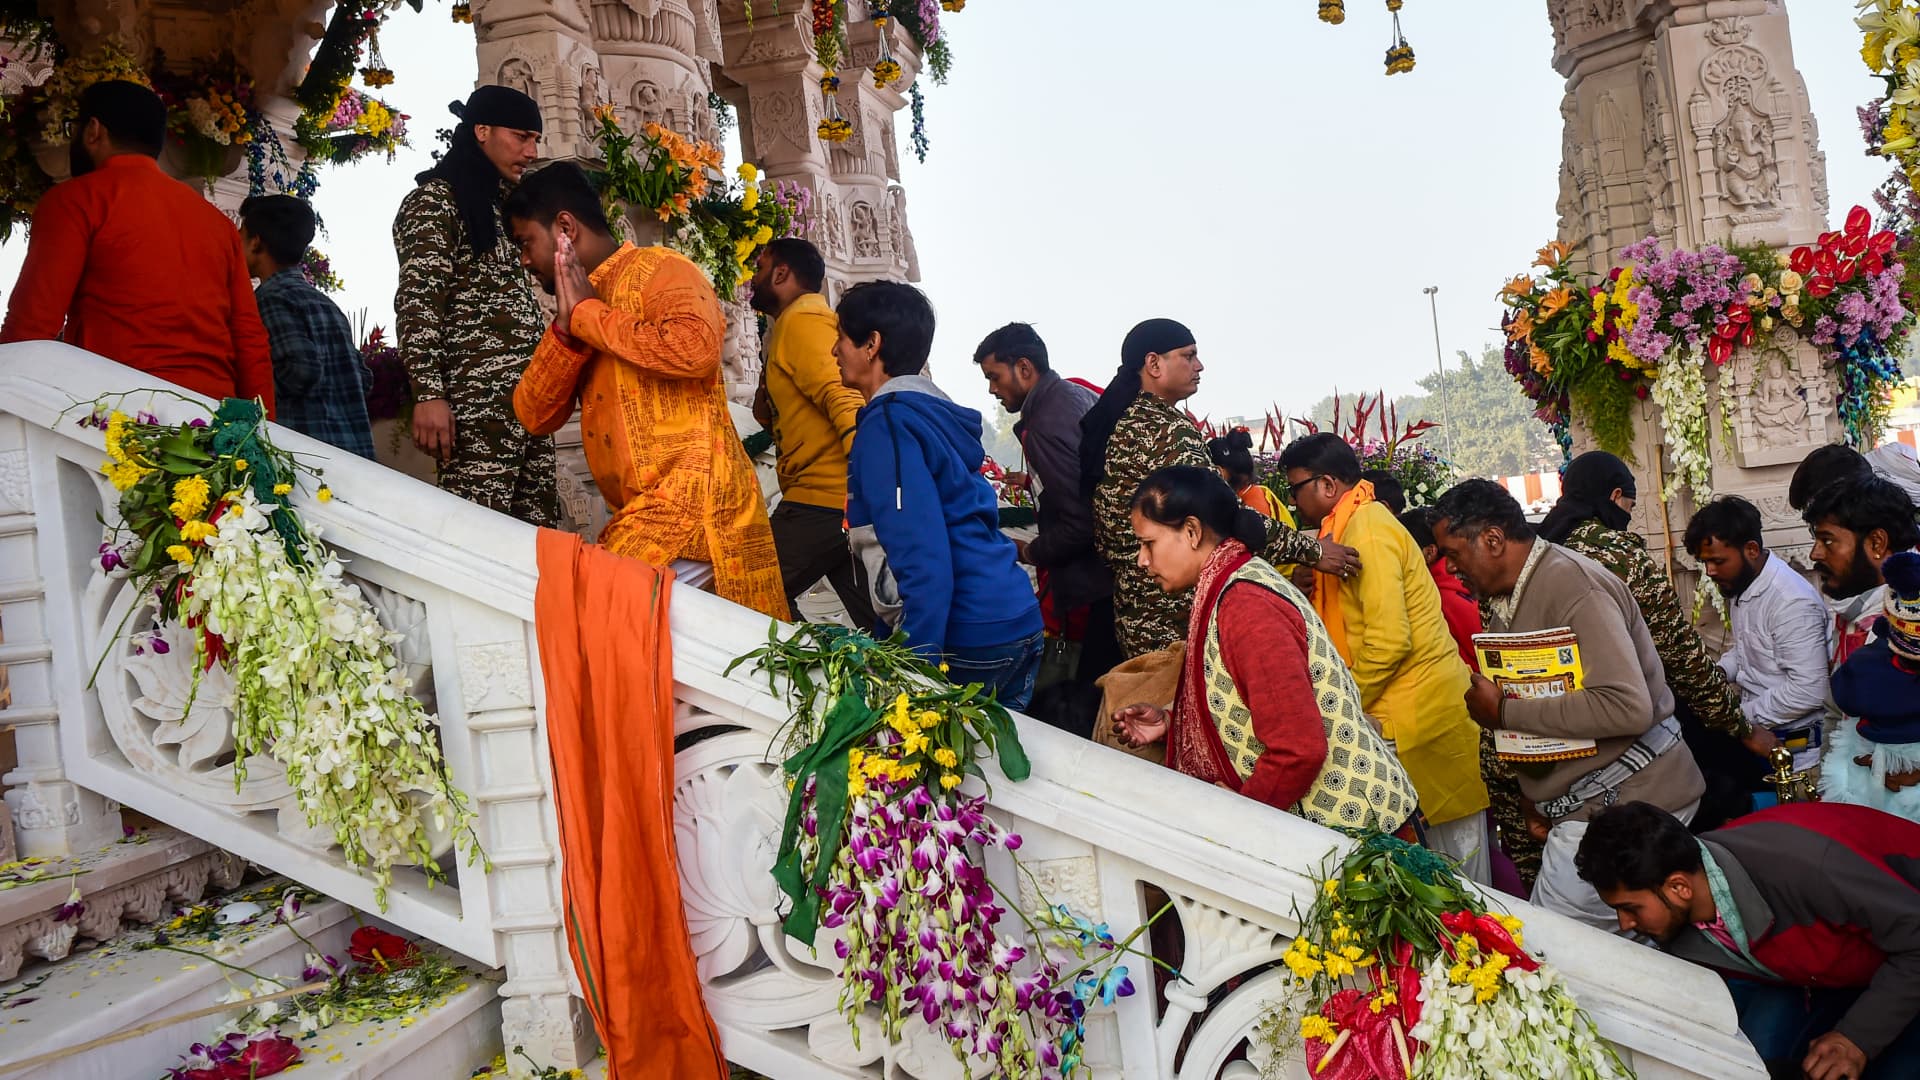 AYODHYA, INDIA - JANUARY 23: Devotees queue to get glimpse of a statue of the hindu god Ram one day after consecration ceremony of the Ram Mandir on January 23, 2024 in Ayodhya, India. The Ram Mandir, a temple built at a site thought to be the birth place of Lord Rama, a significant figure in Hindu religion, was inaugurated on Jan. 22, 2024. (Photo by Ritesh Shukla/Getty Images)